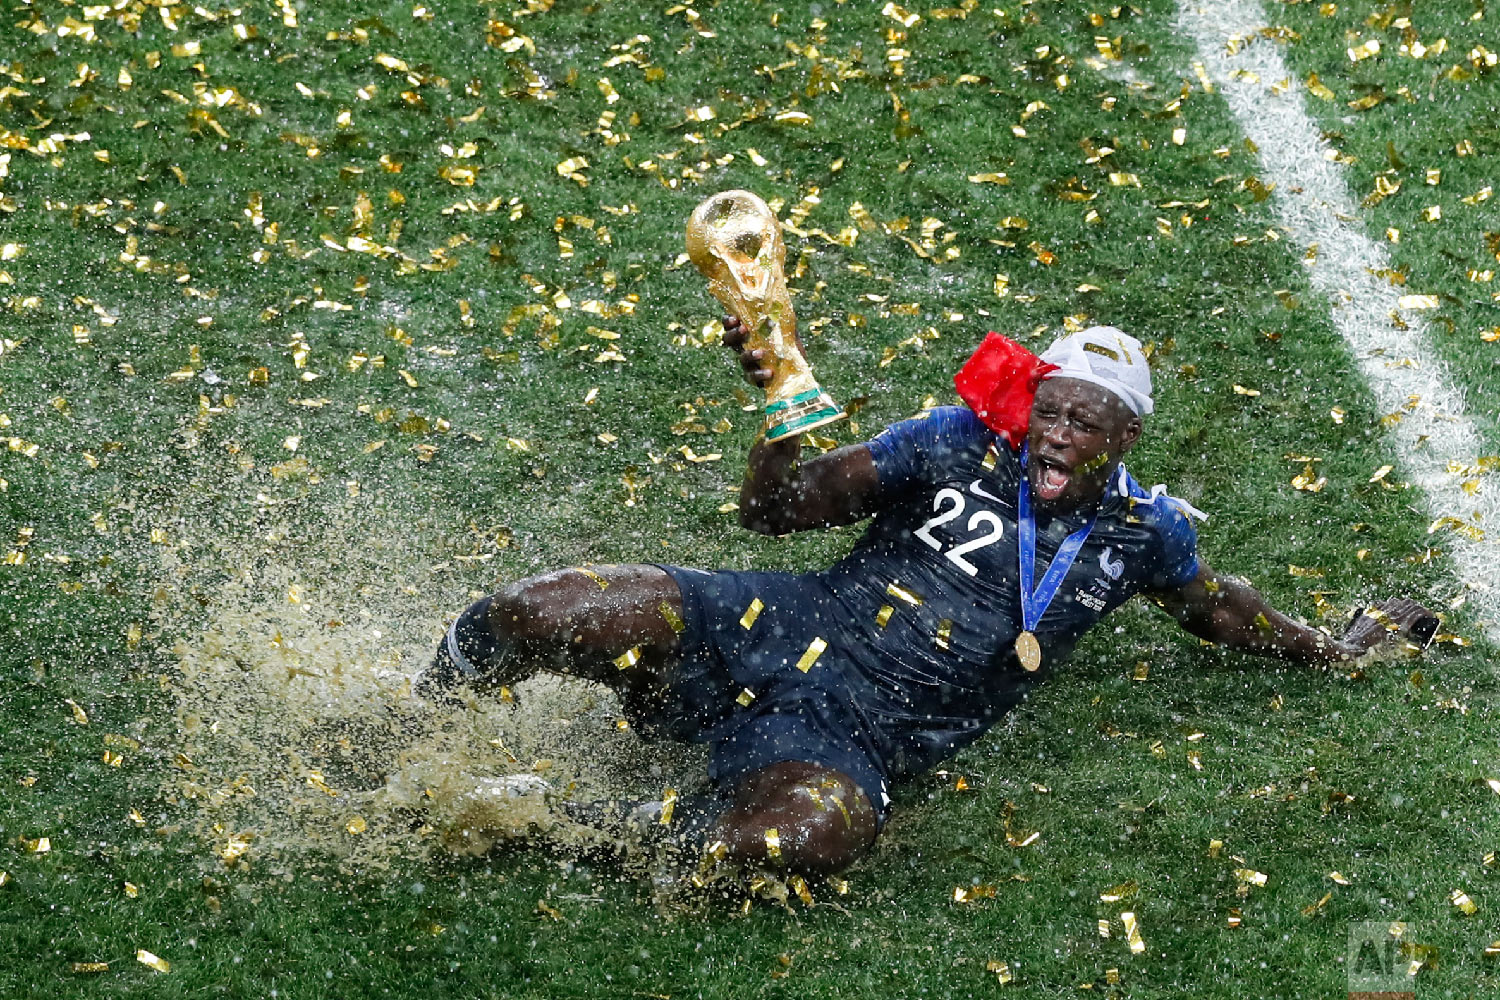  France's Benjamin Mendy celebrates with the trophy after his team won the final match against Croatia at the 2018 soccer World Cup in the Luzhniki Stadium in Moscow, Russia, on July 15, 2018. (AP Photo/Rebecca Blackwell) 